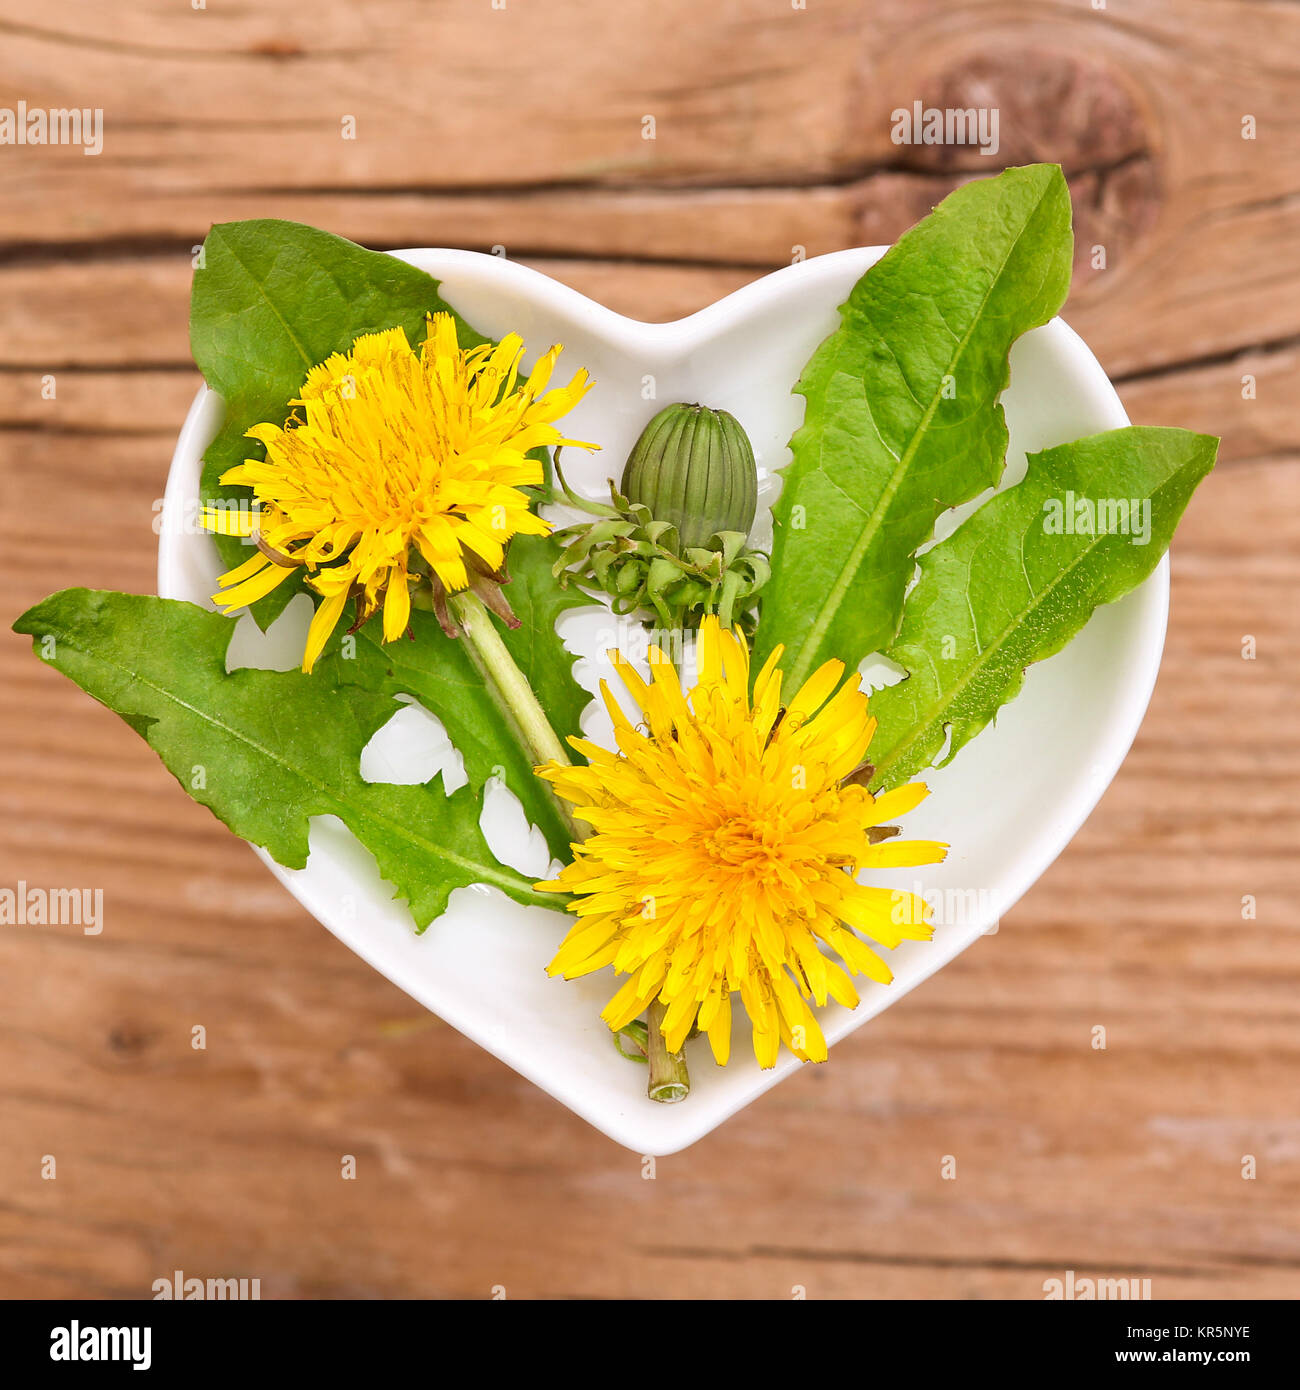 homeopathy and cooking with herbs,dandelions Stock Photo